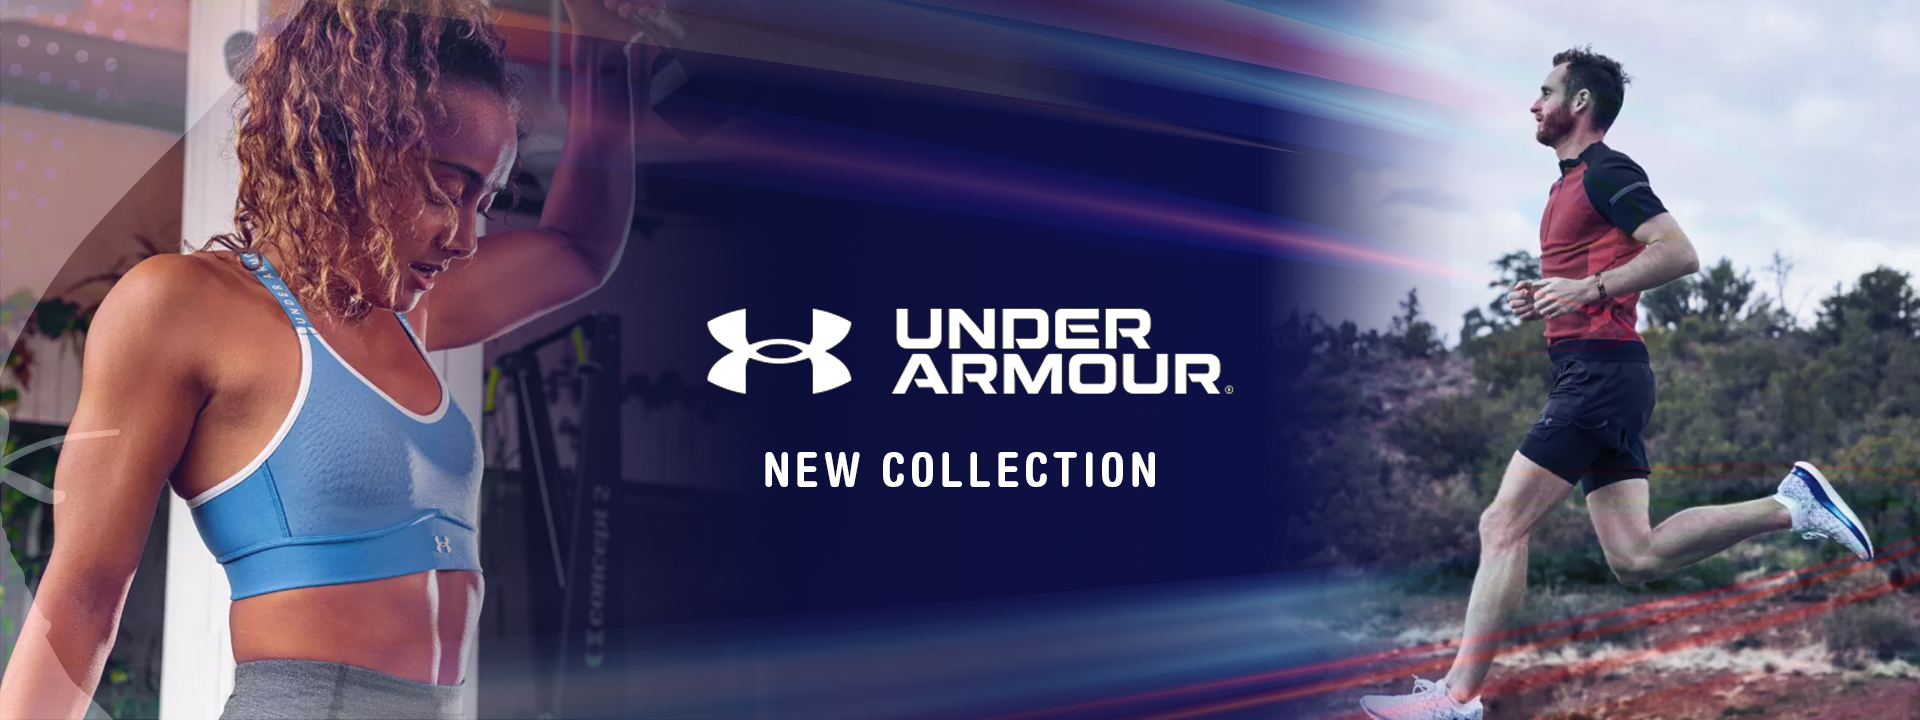 underarmournewcollection